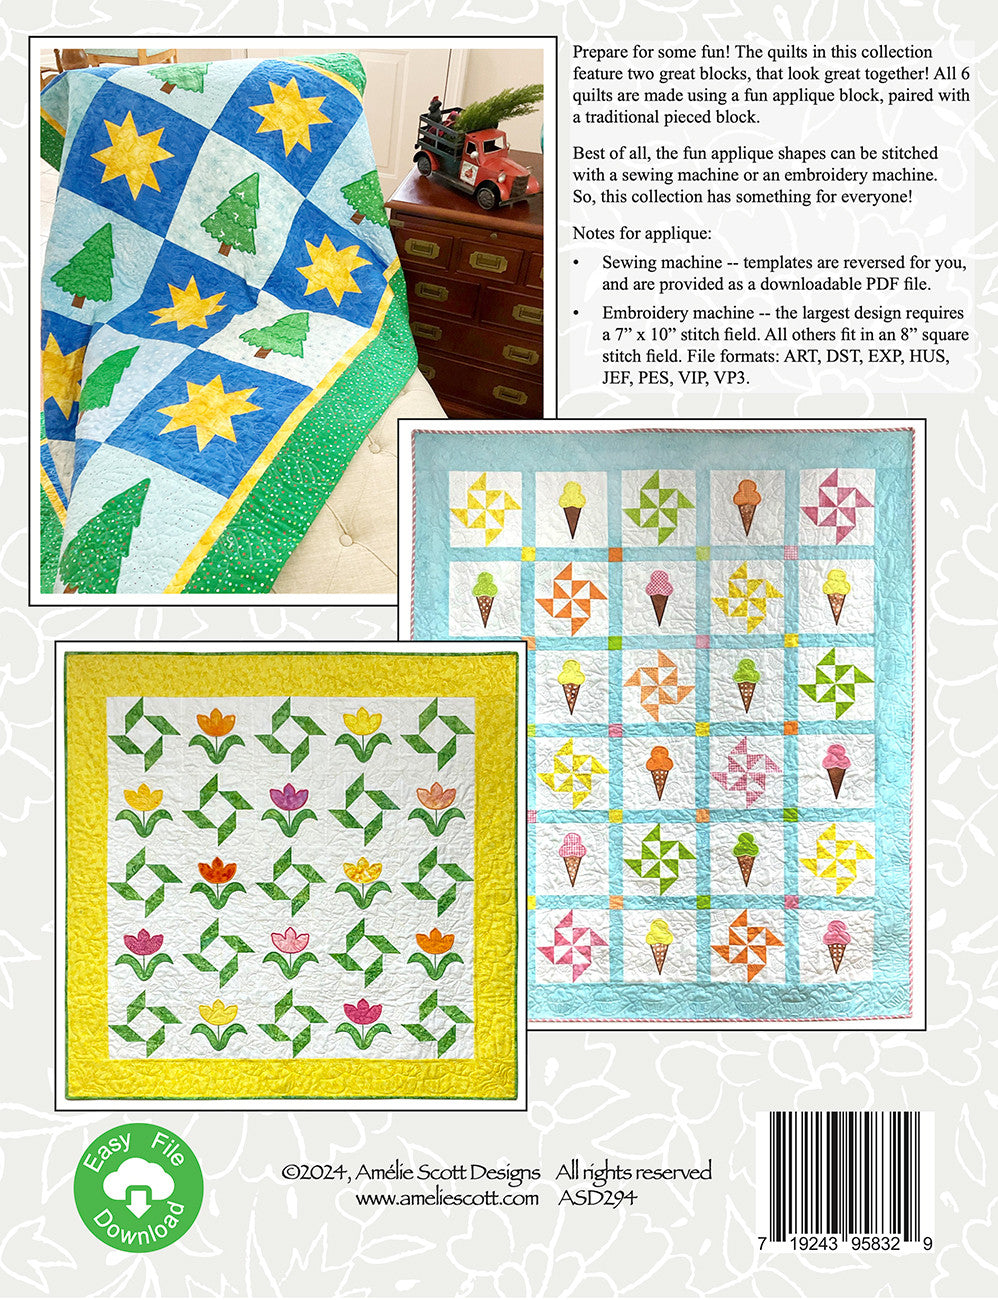 Perfect Pairings Quilt Pattern Booklet from Amelie Scott Designs